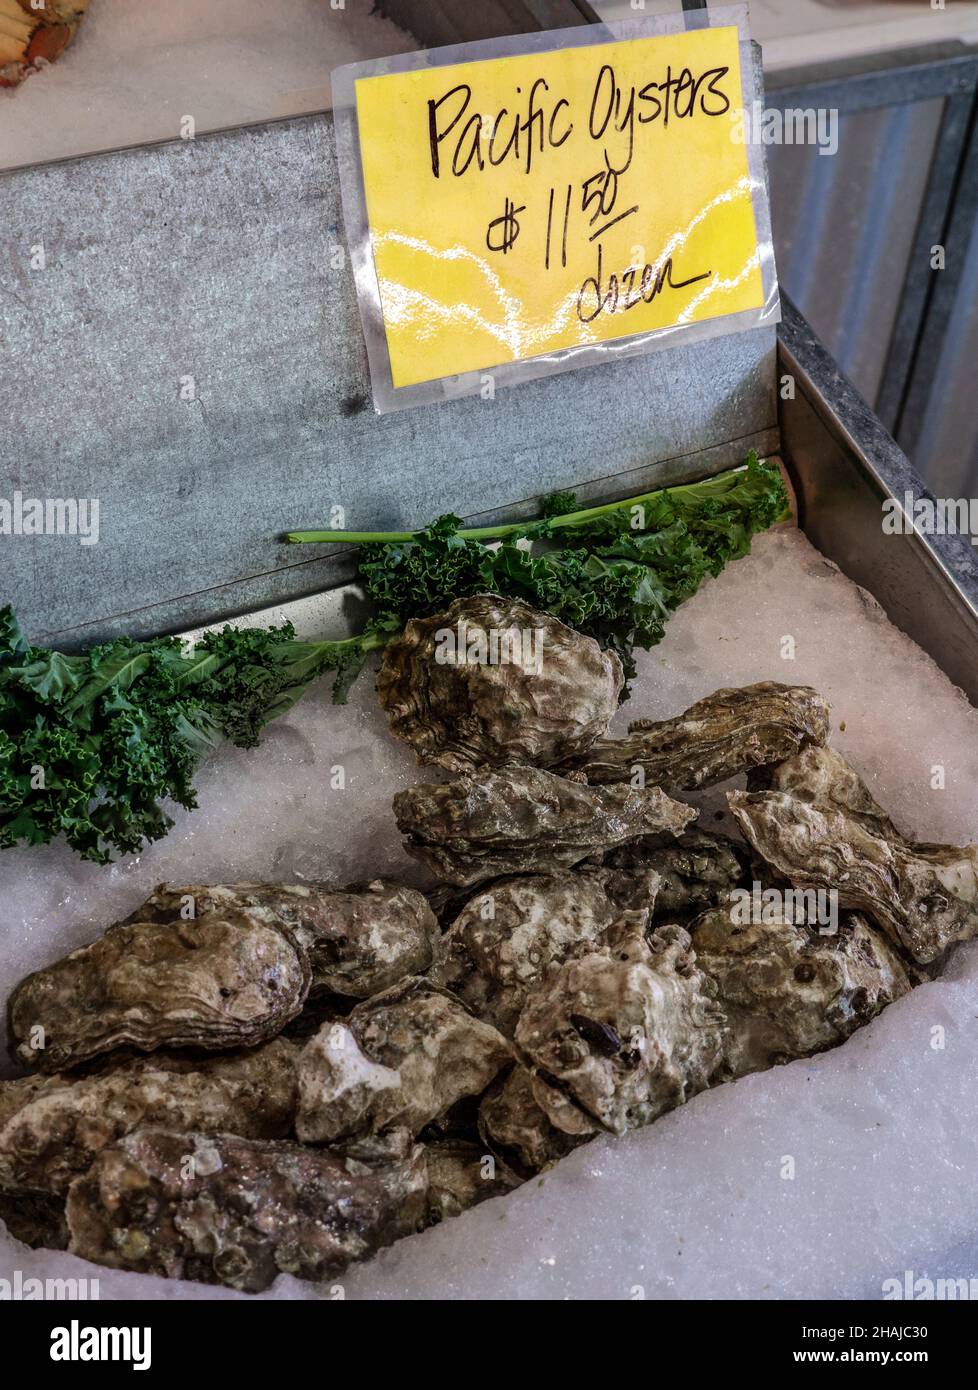 Pacific oysters on display for sale (Japanese oyster, or Miyagi oyster) Magallana gigas, is an oyster native to the Pacific coast of Asia. It has become an introduced species in California USA North America, Phil's Fish Market & Eatery at Moss Landing Monterey  Bay California USA Stock Photo